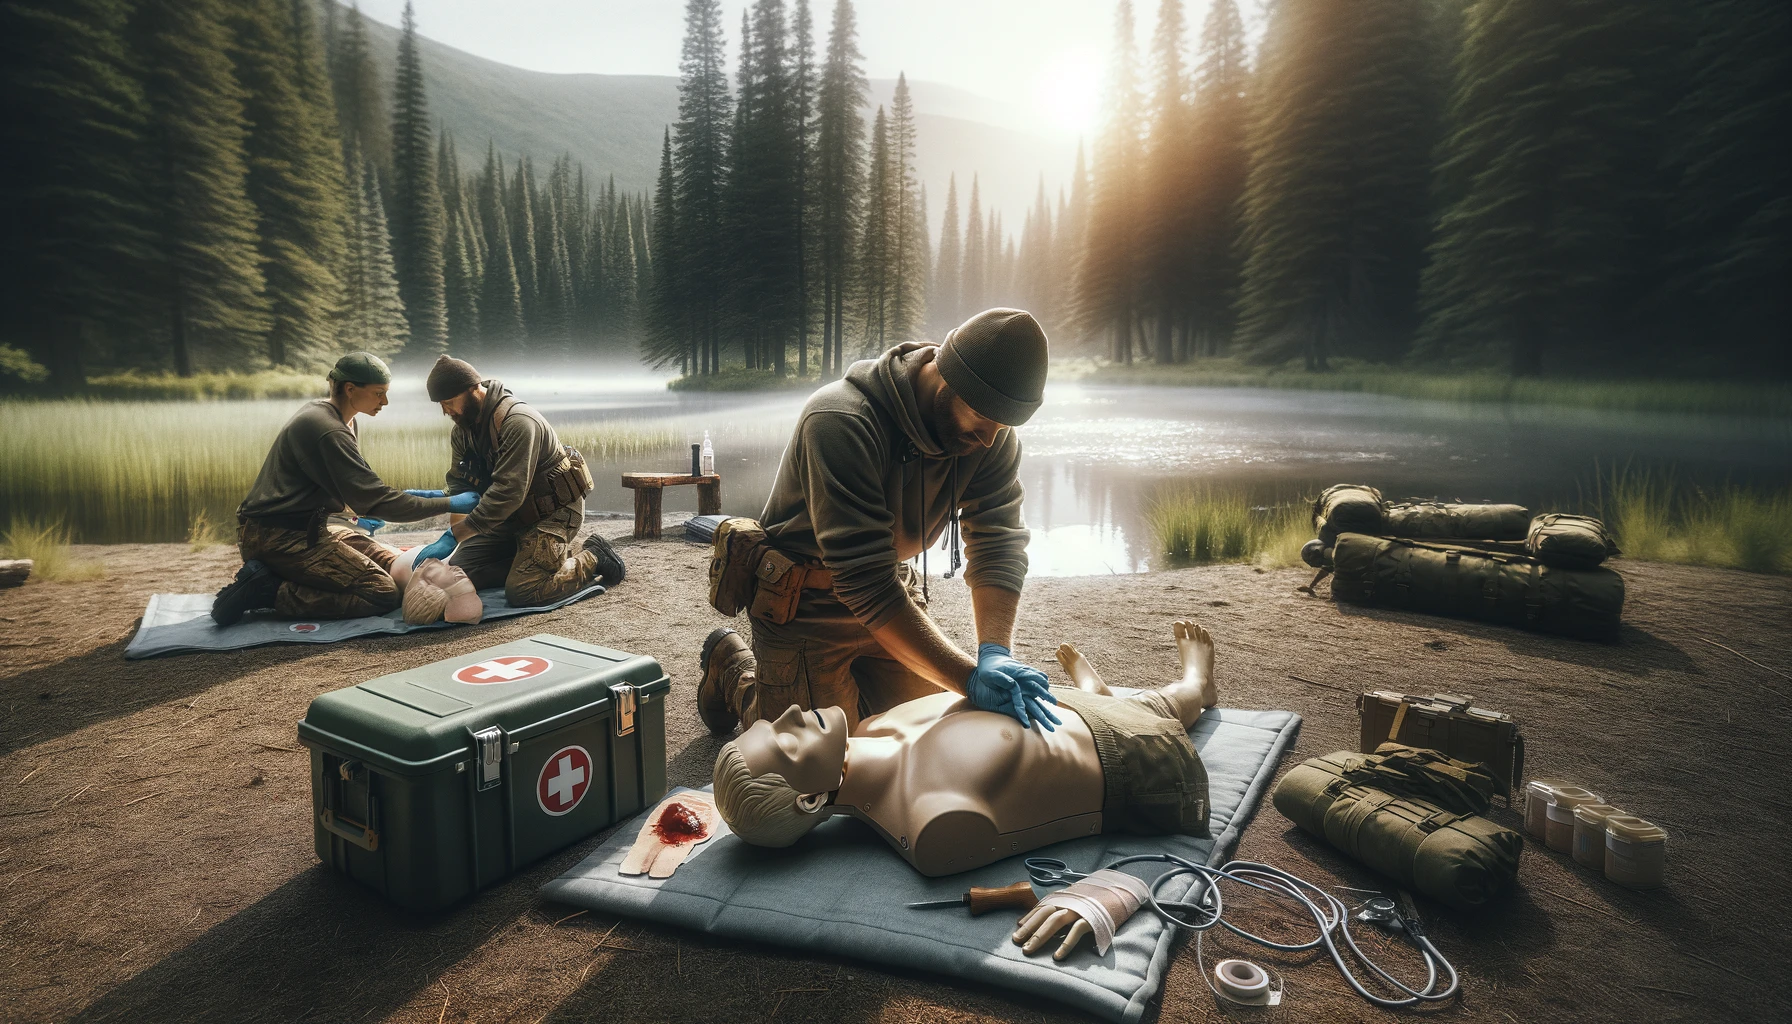 Educational emergency first aid workshop in wilderness with CPR demonstration on mannequin, bandaging, and wound care, set in a serene forest clearing for preppers